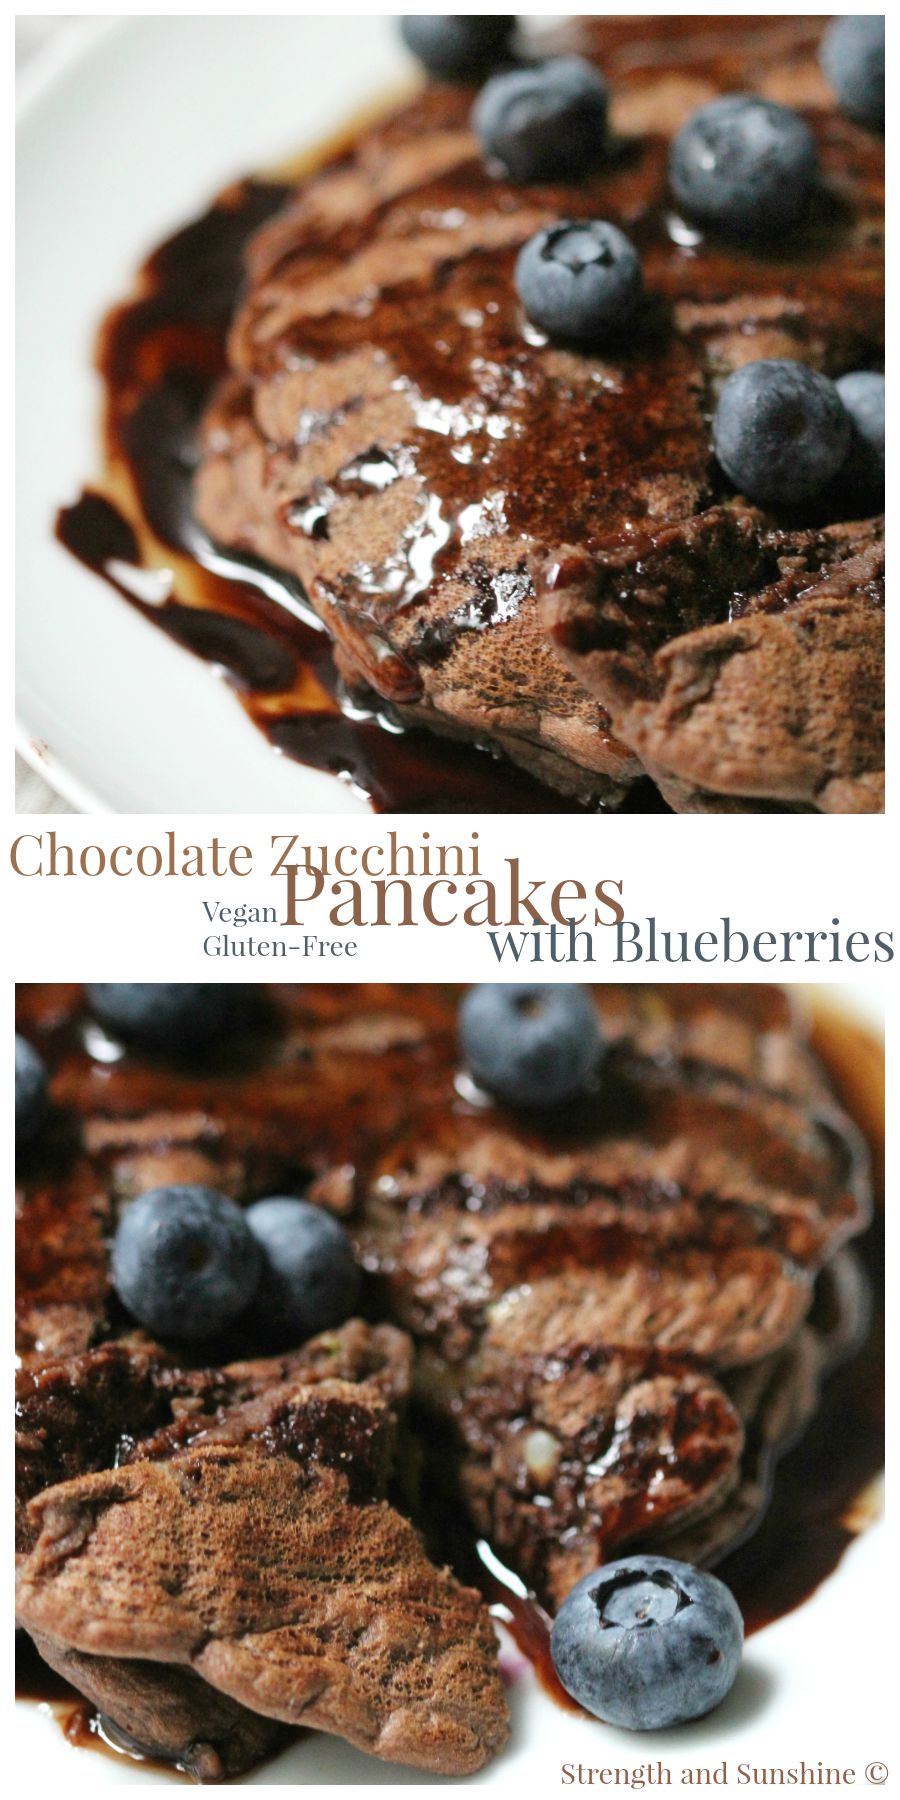 Chocolate Zucchini Pancakes With Blueberries | Strength and Sunshine @RebeccaGF666 The greatest gluten-free vegan pancakes you will ever make. Chocolate zucchini pancakes with blueberries are a weekend essential perfected for weekend breakfast bliss.